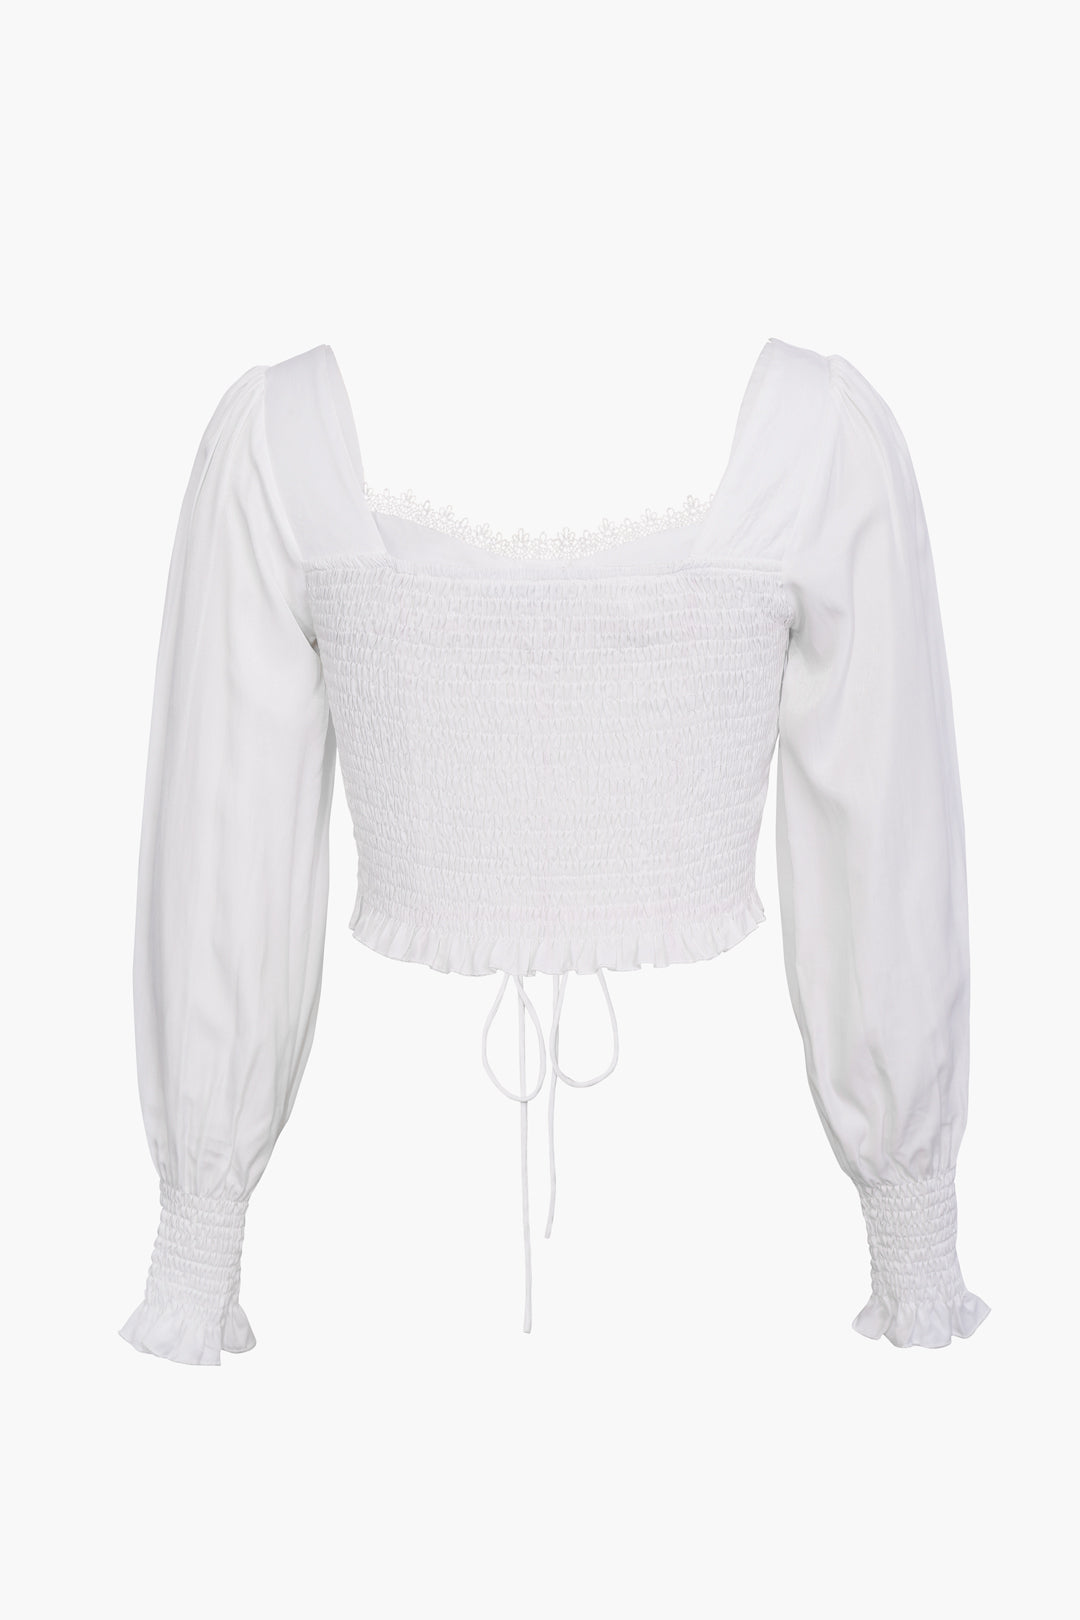 Lace Frills Tie Front Long Sleeve Top